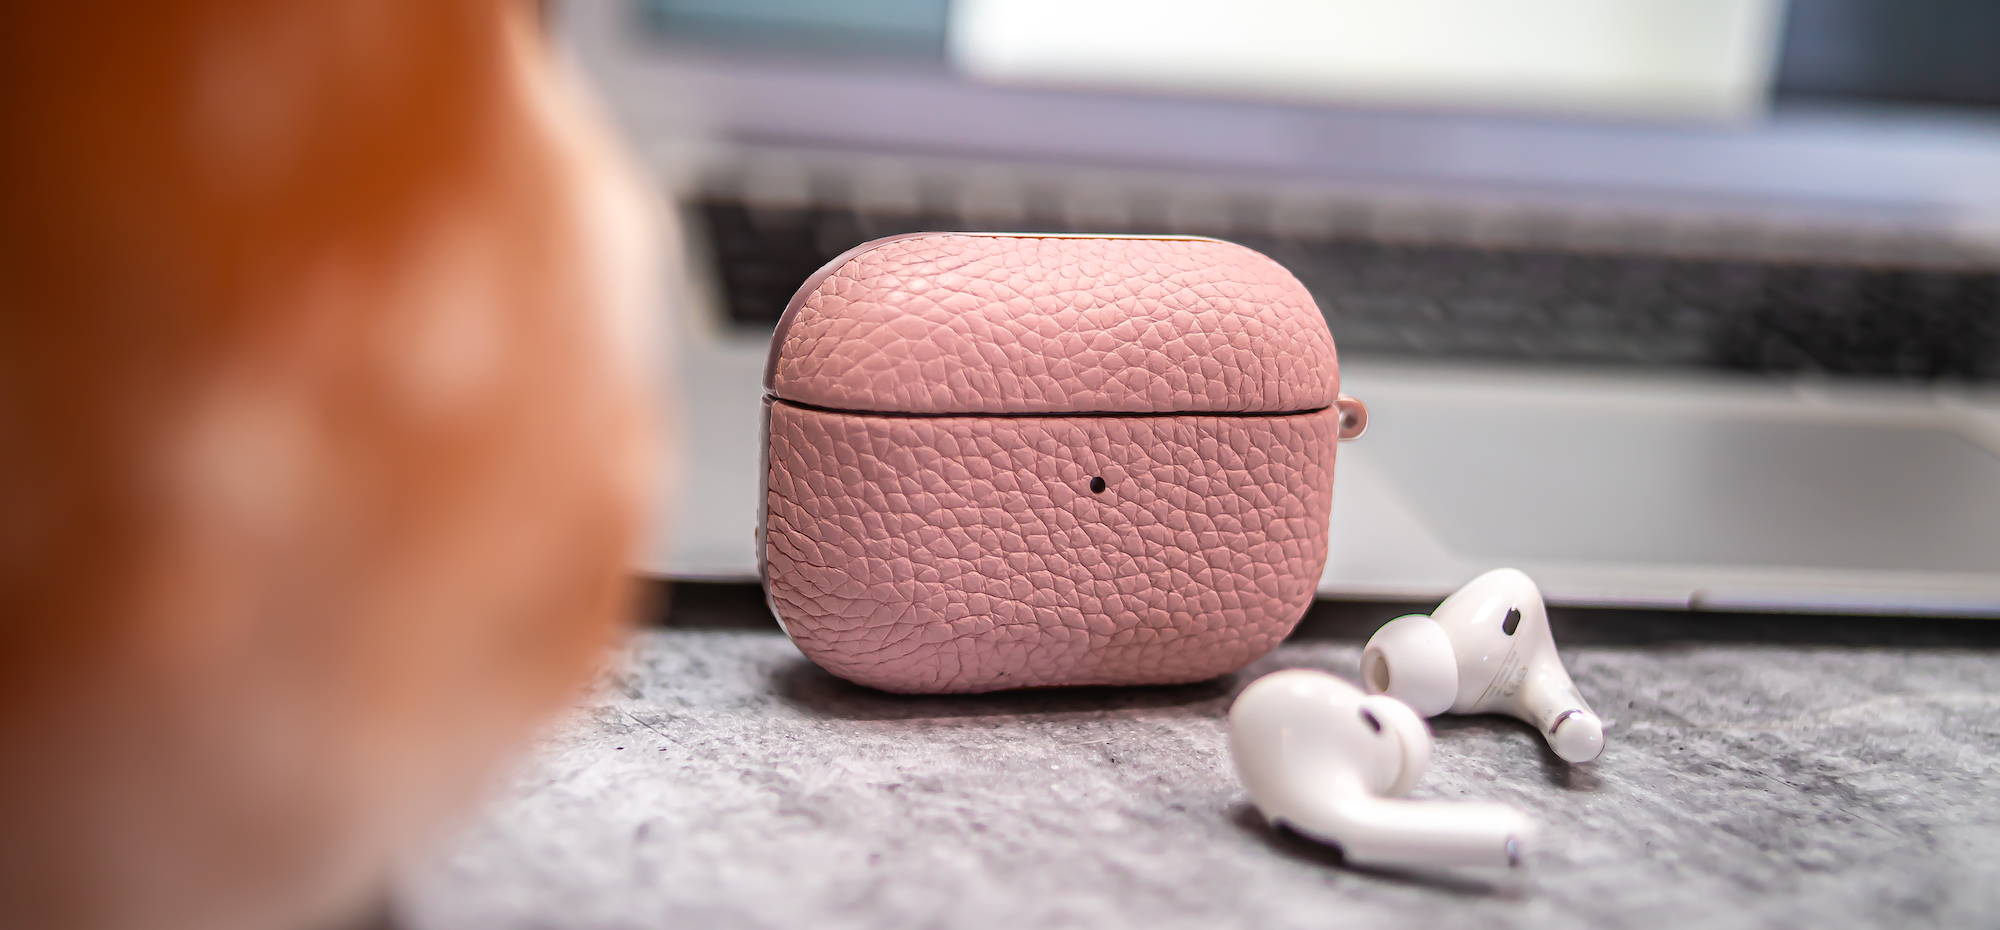 pink genuine leather airpods pro case standing up on granite table